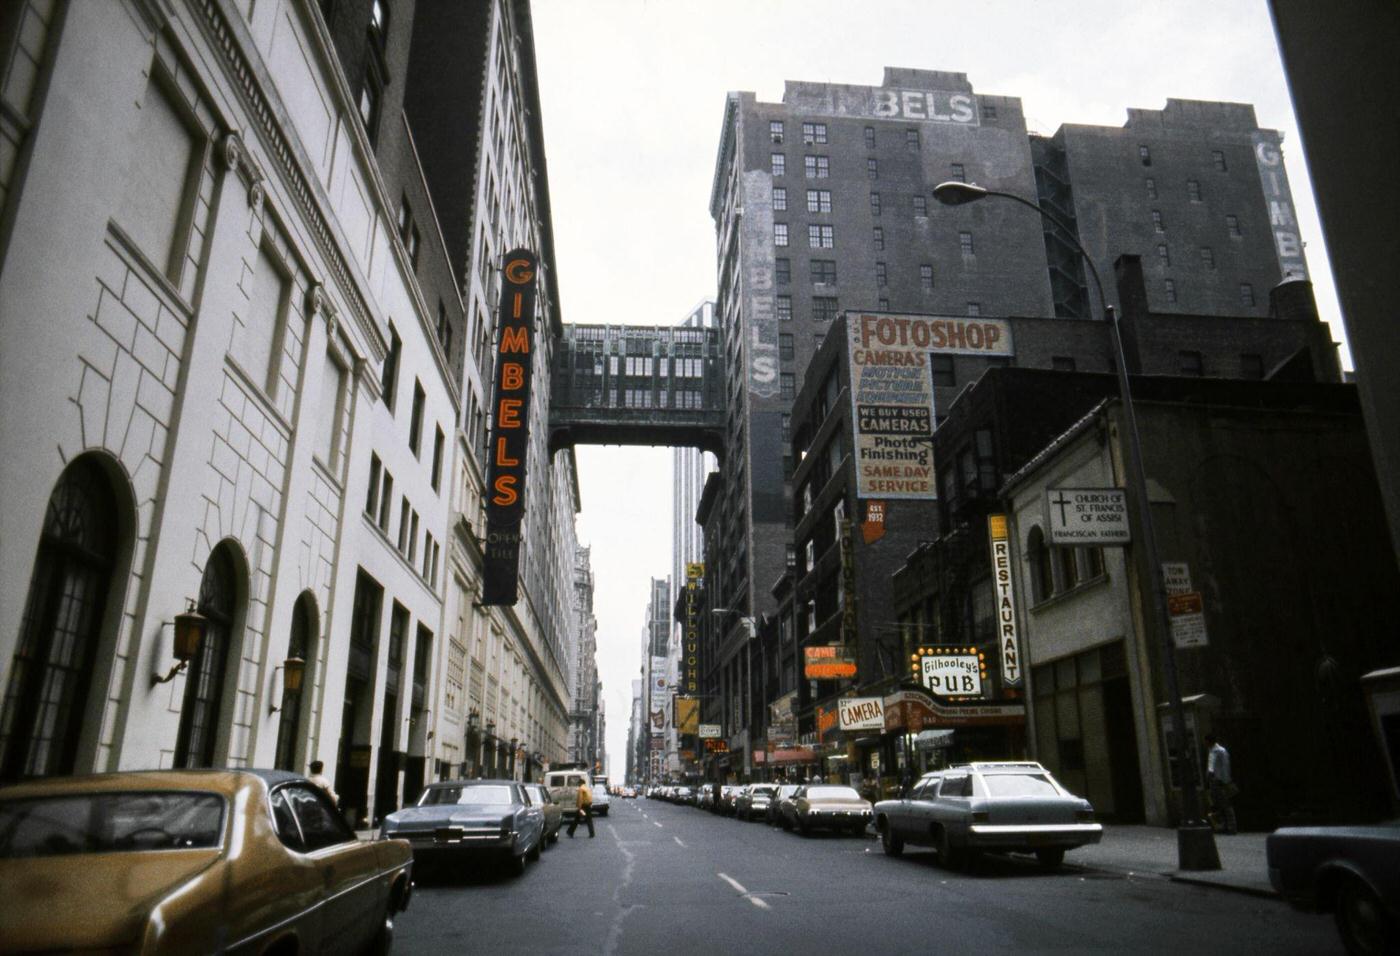 View Of 32Nd Street And Gimbles Department Store In The Herald Square Area In Manhattan, 1976.